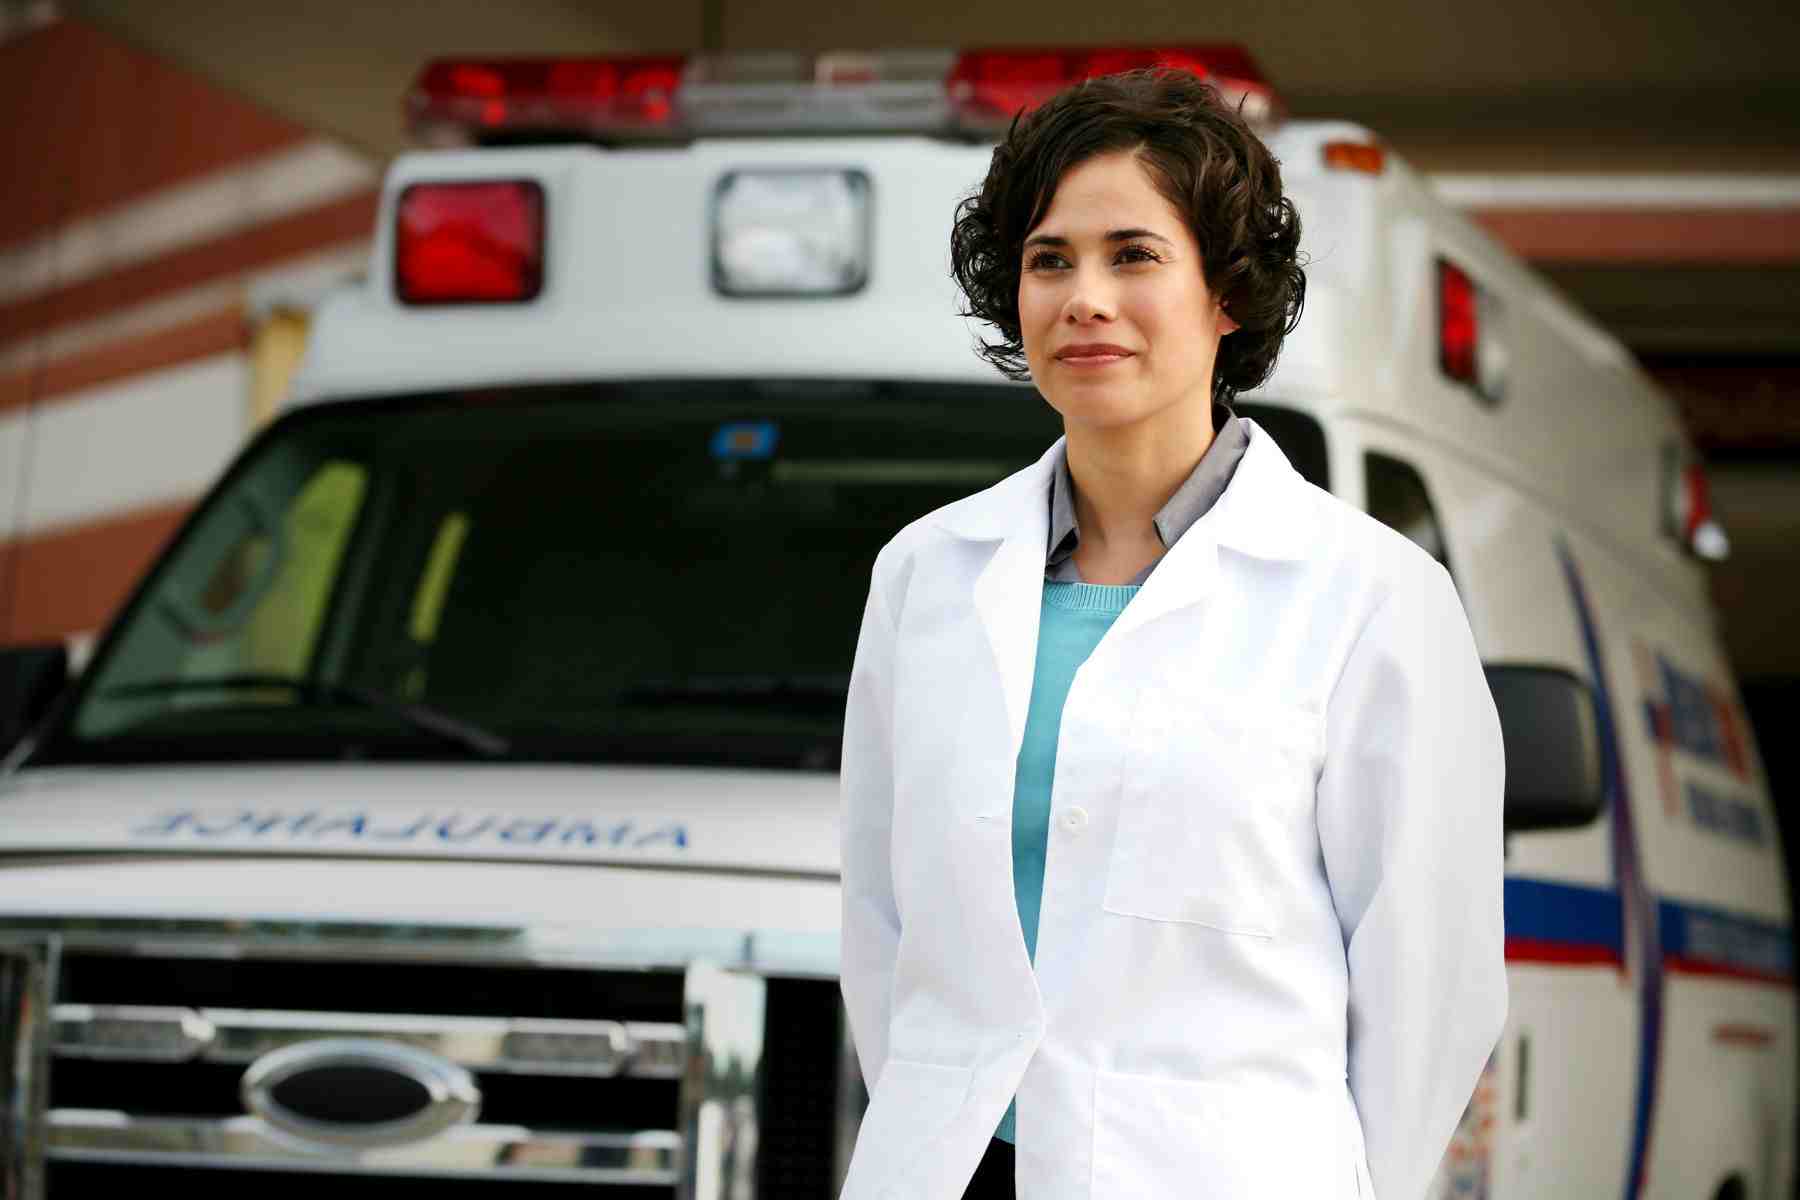 Dedicated Health Provider: Portraits with Ambulance in the Background 